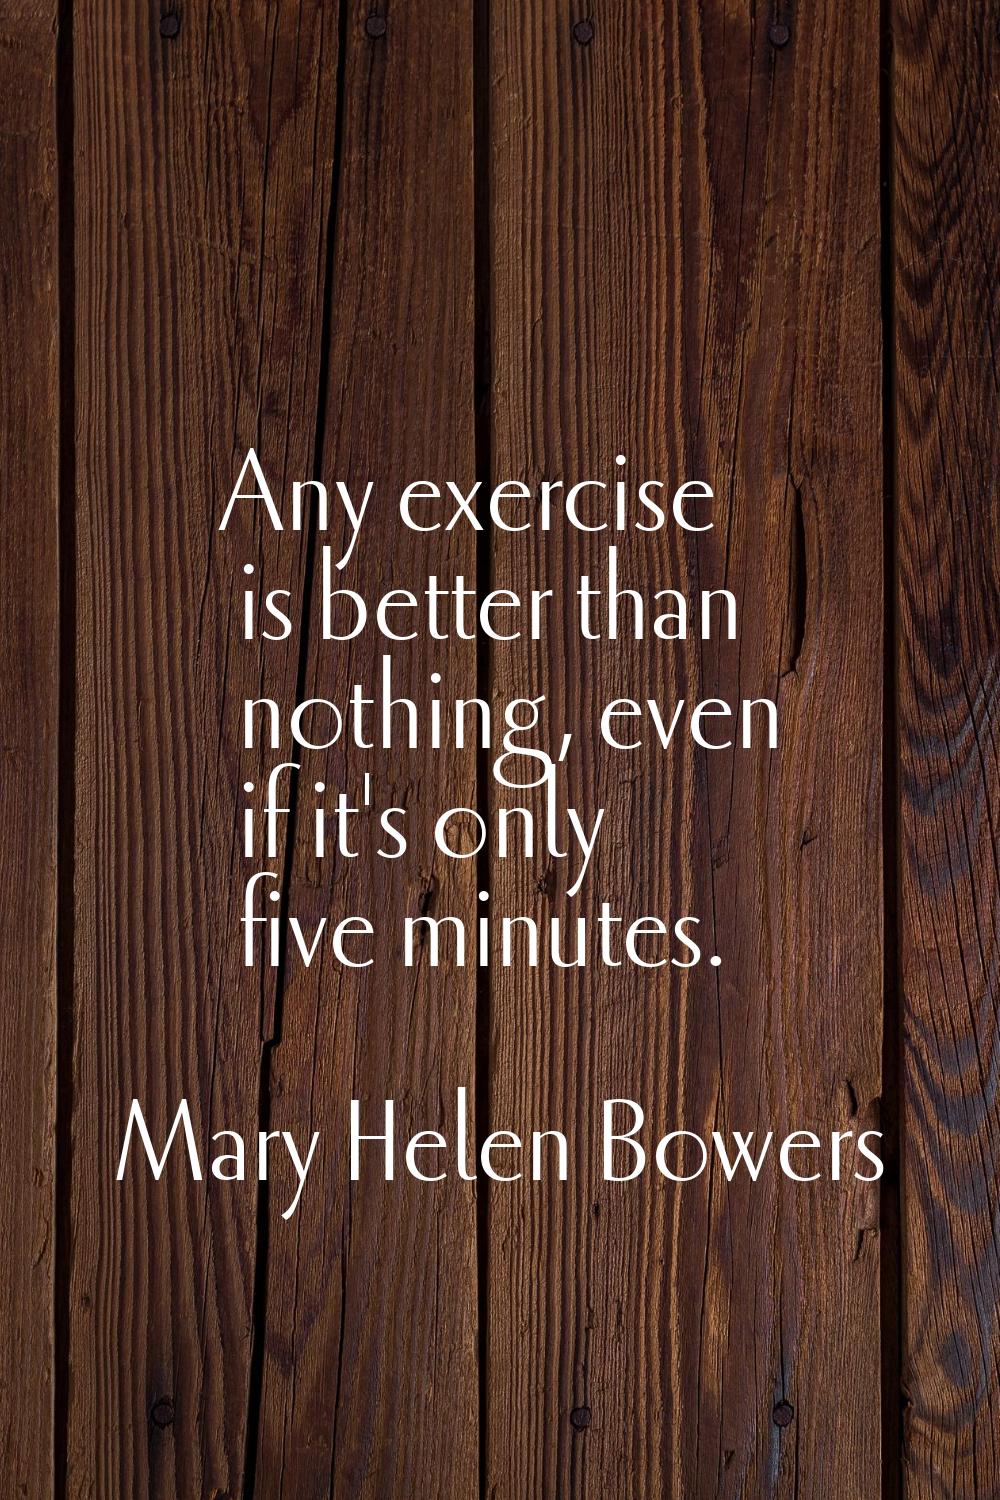 Any exercise is better than nothing, even if it's only five minutes.